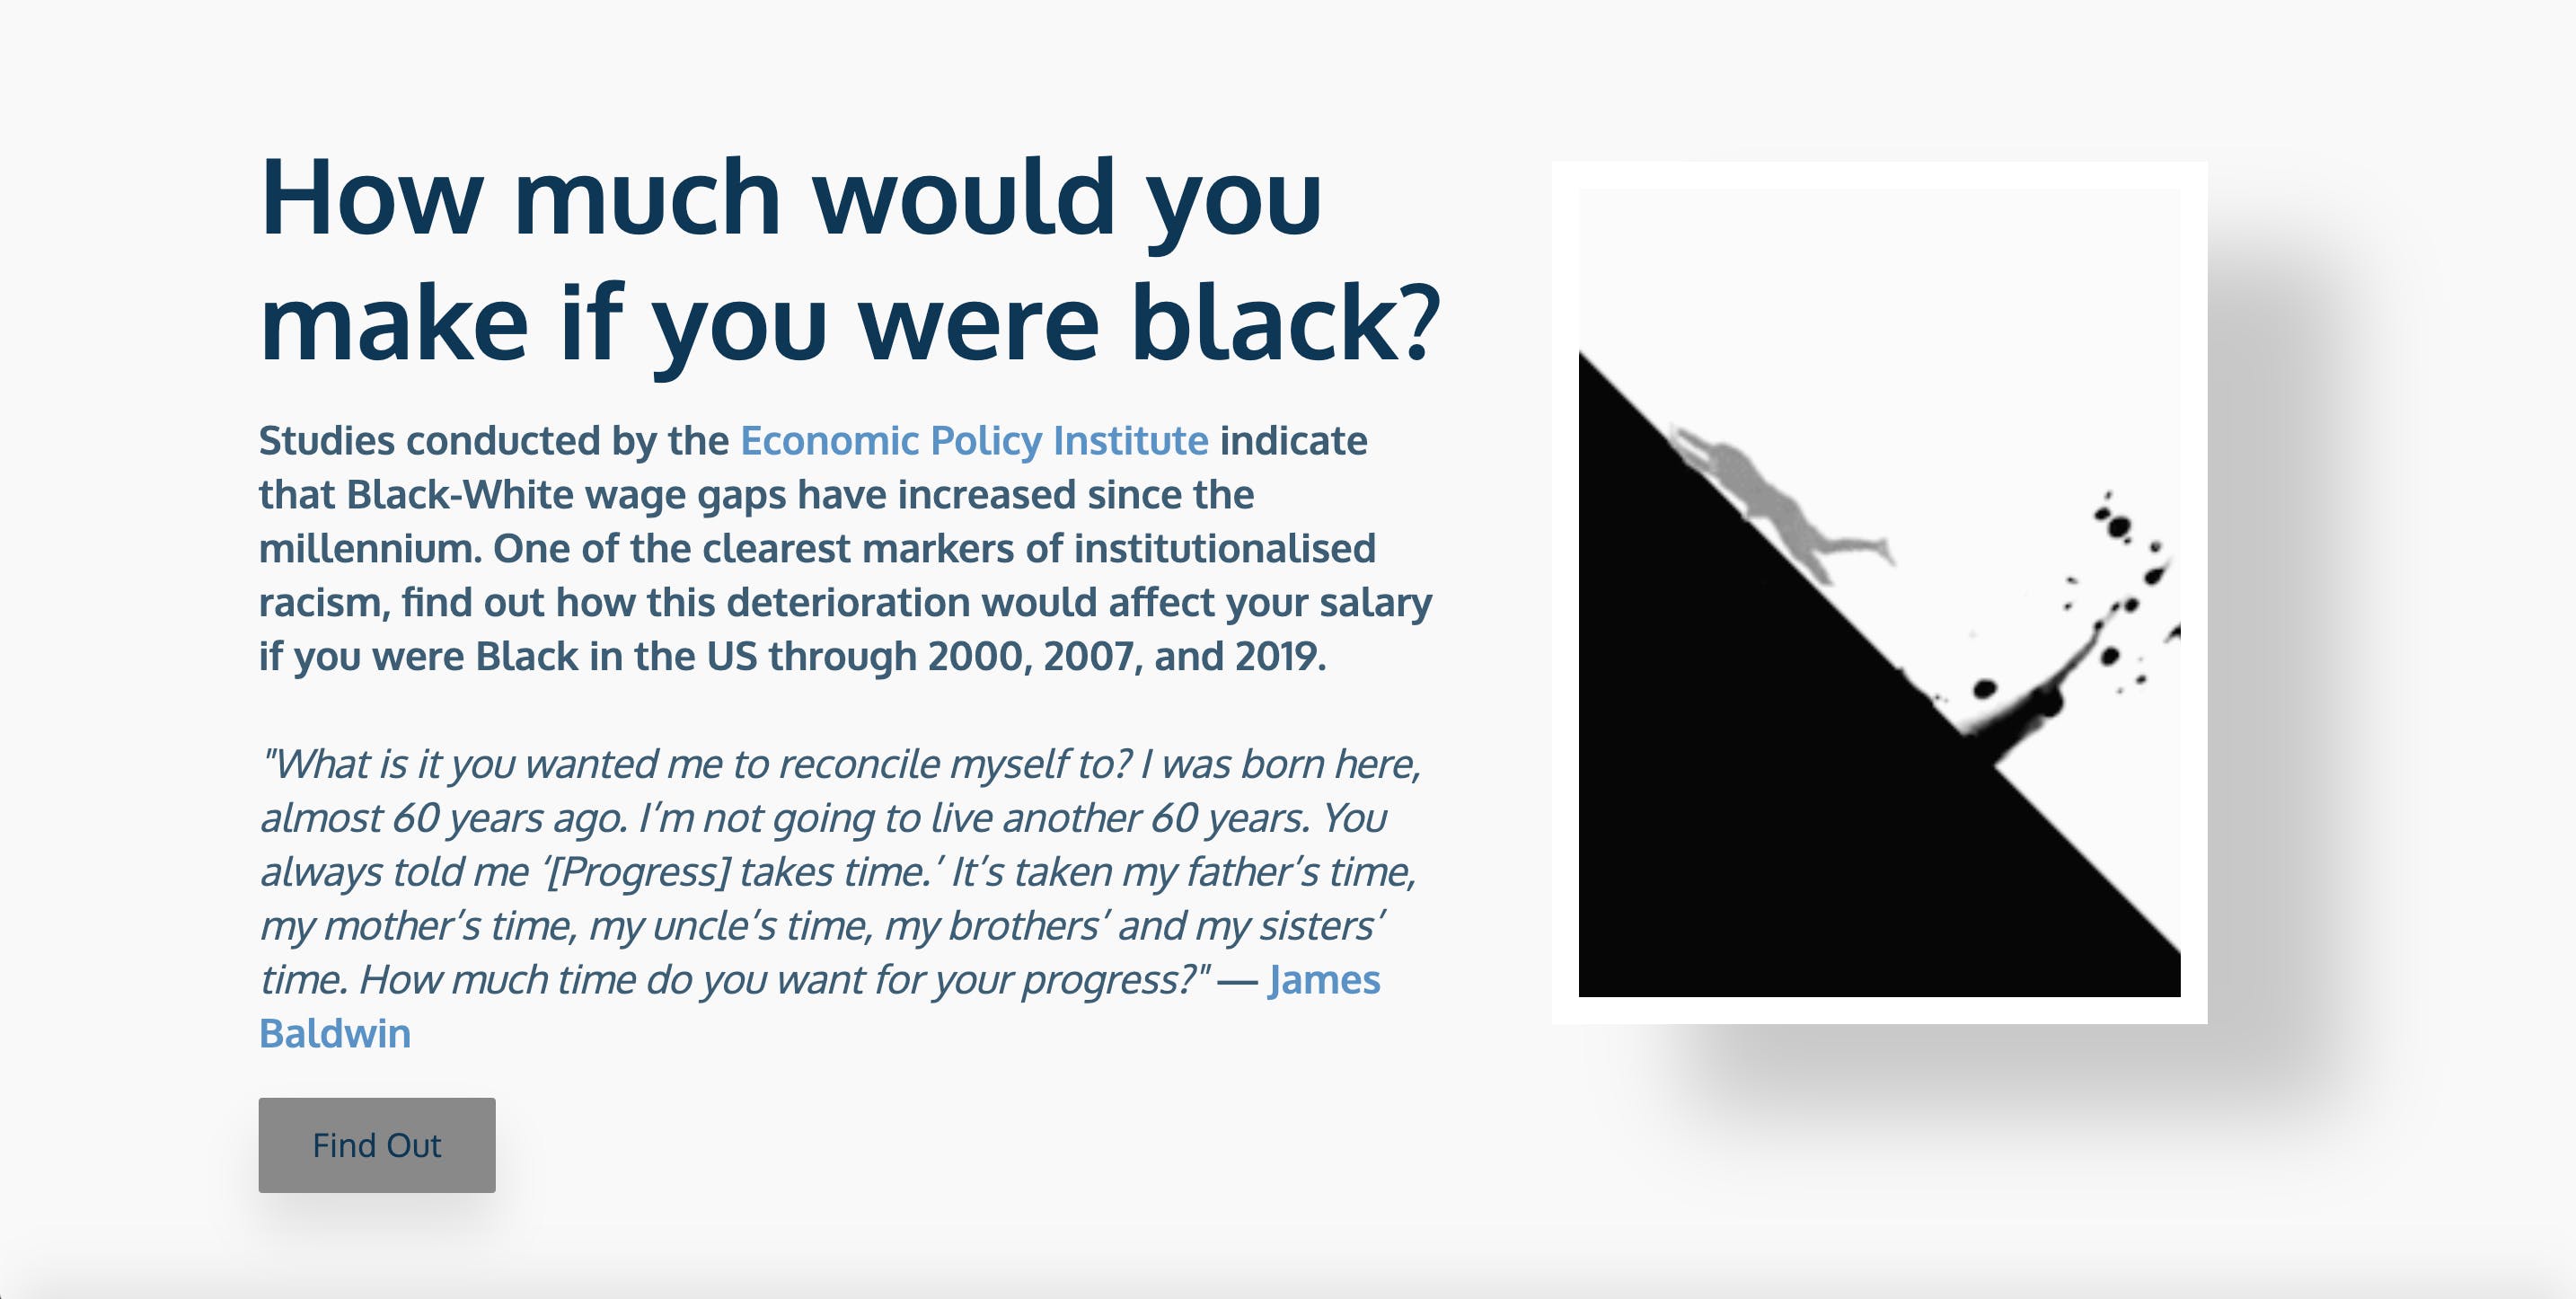 How much would you make if you were black? media 1